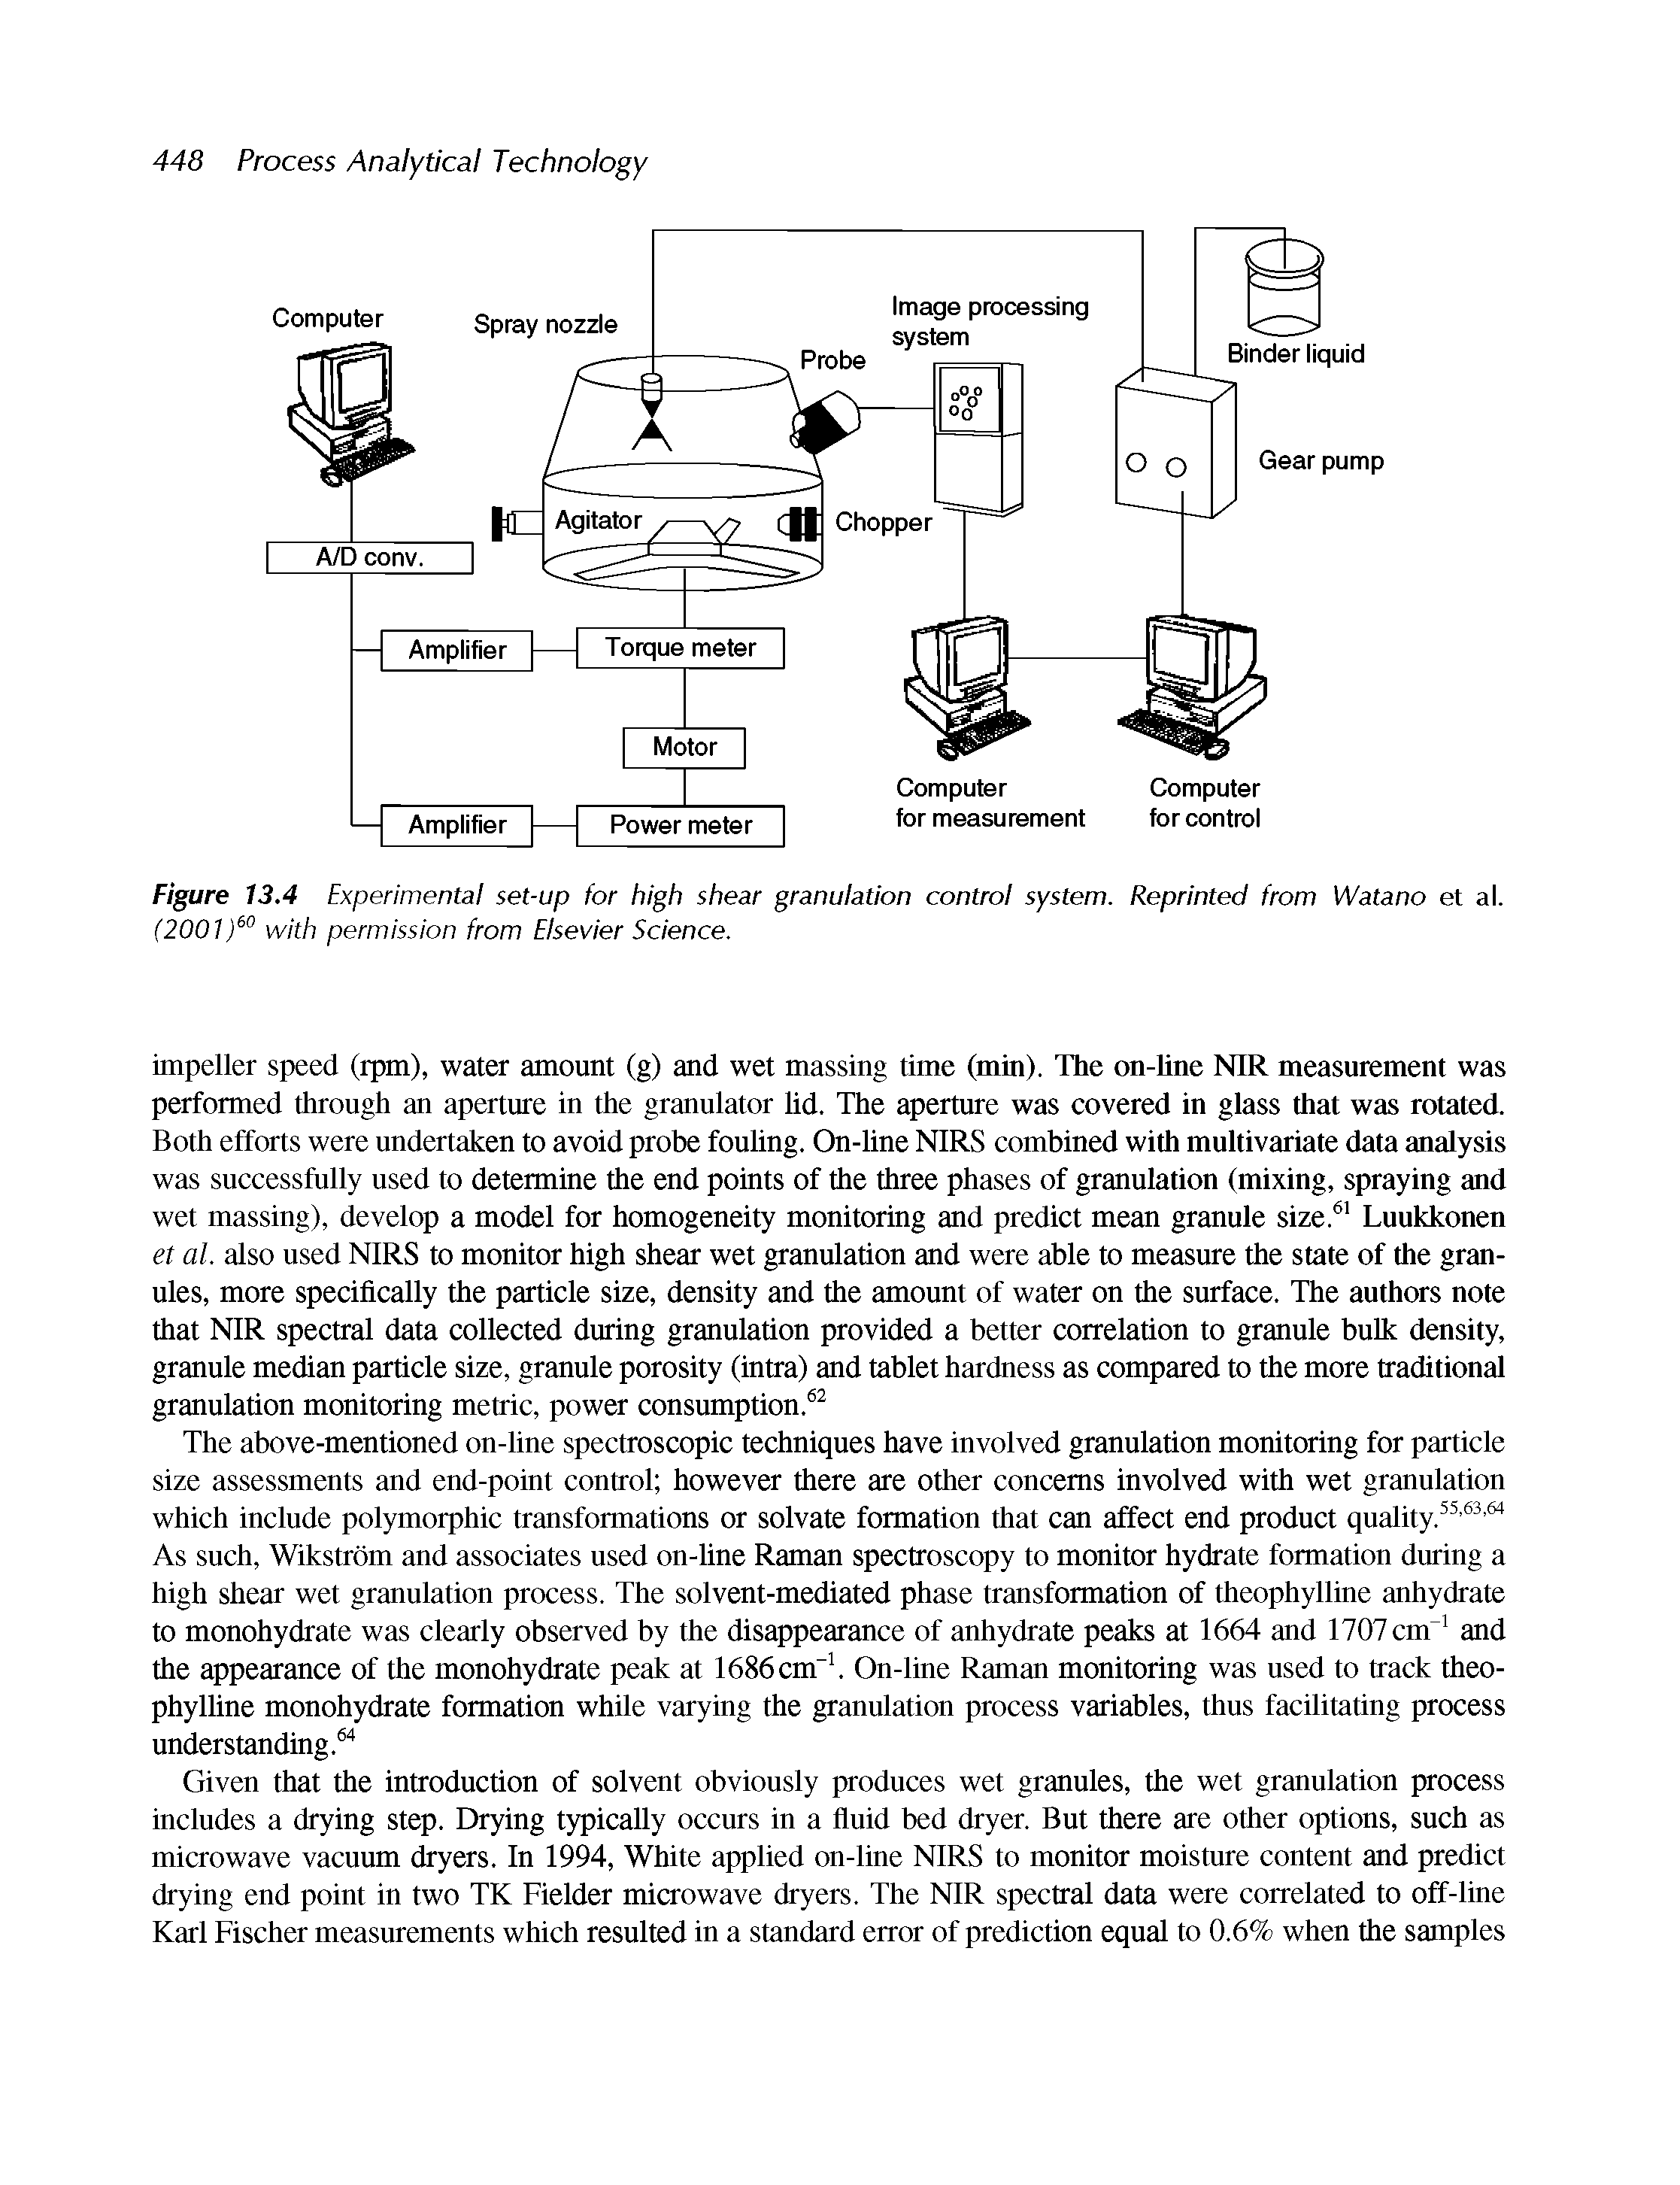 Figure 13.4 Experimental set-up for high shear granulation control system. Reprinted from Watano et al. (200 with permission from Elsevier Science.